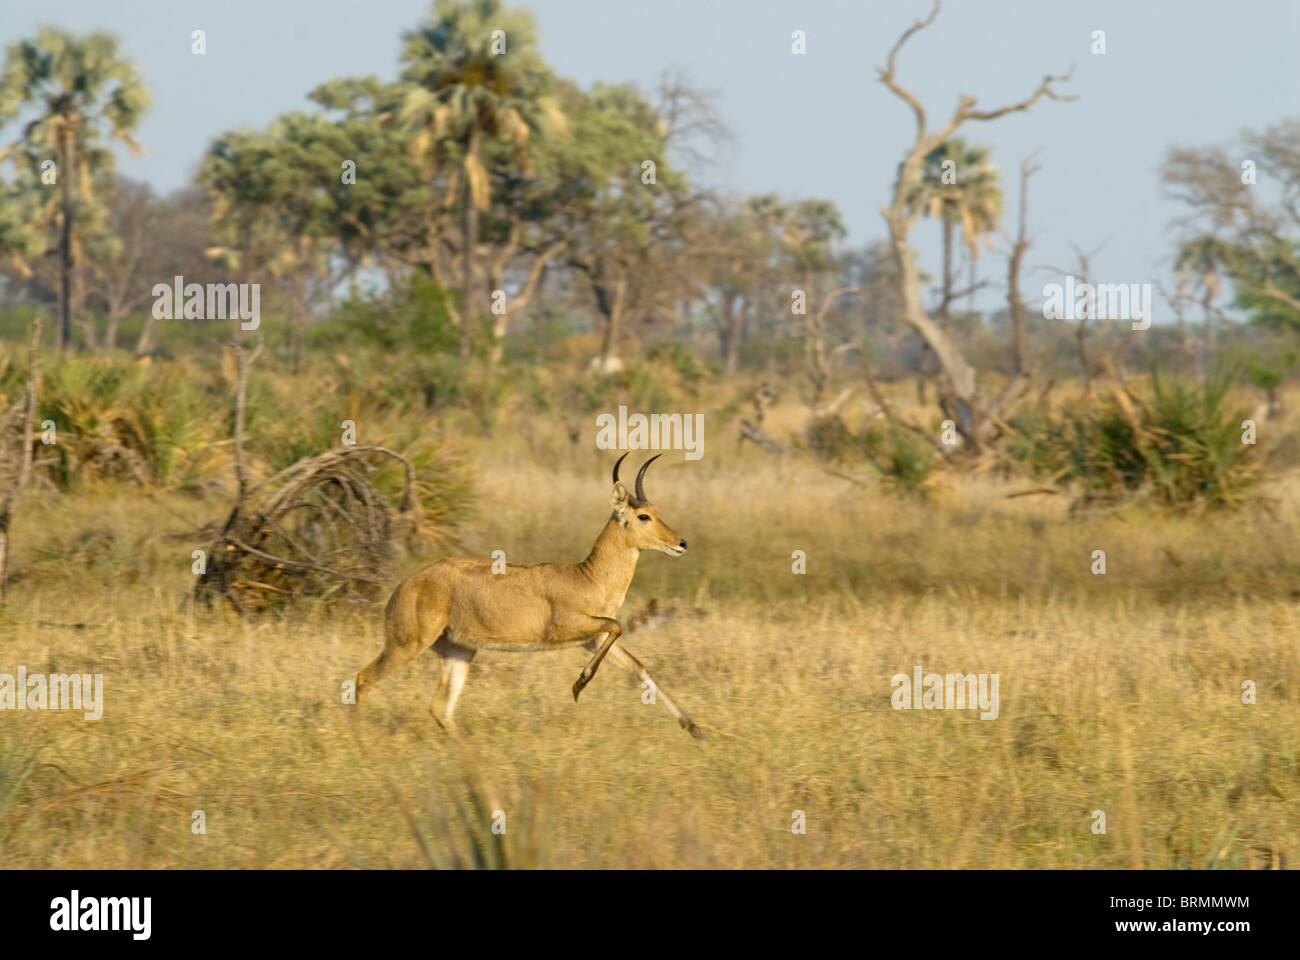 Scenic view of a Common Reed buck running in open savanna Stock Photo